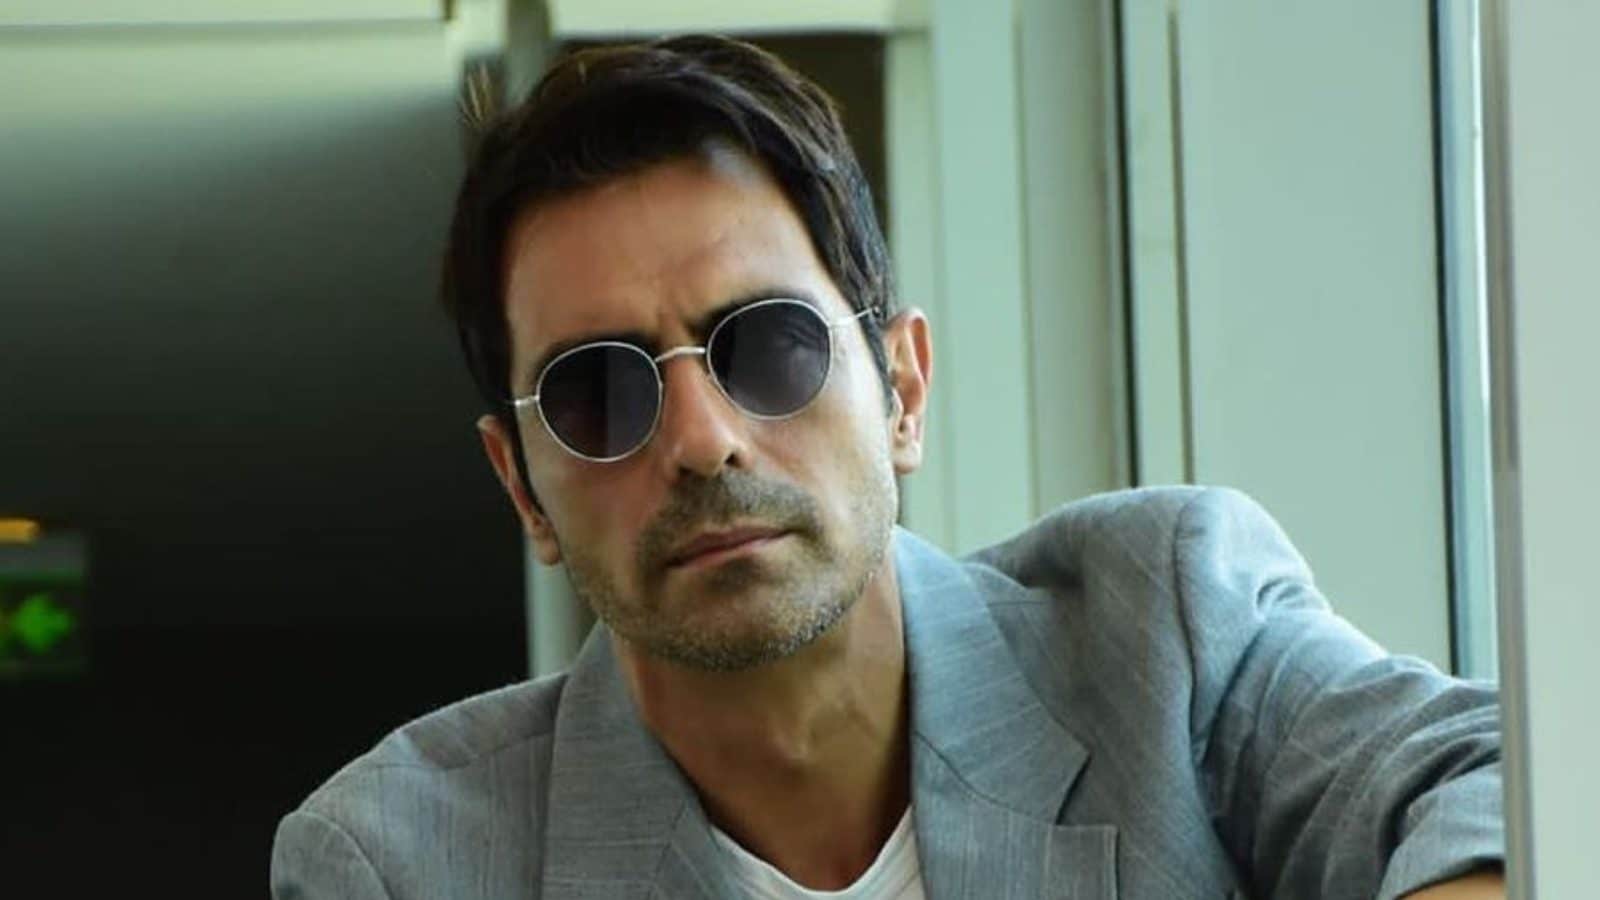 When Arjun Rampal Revealed His Daughters' Cute Reaction To Him Being Voted 'Most Desirable'